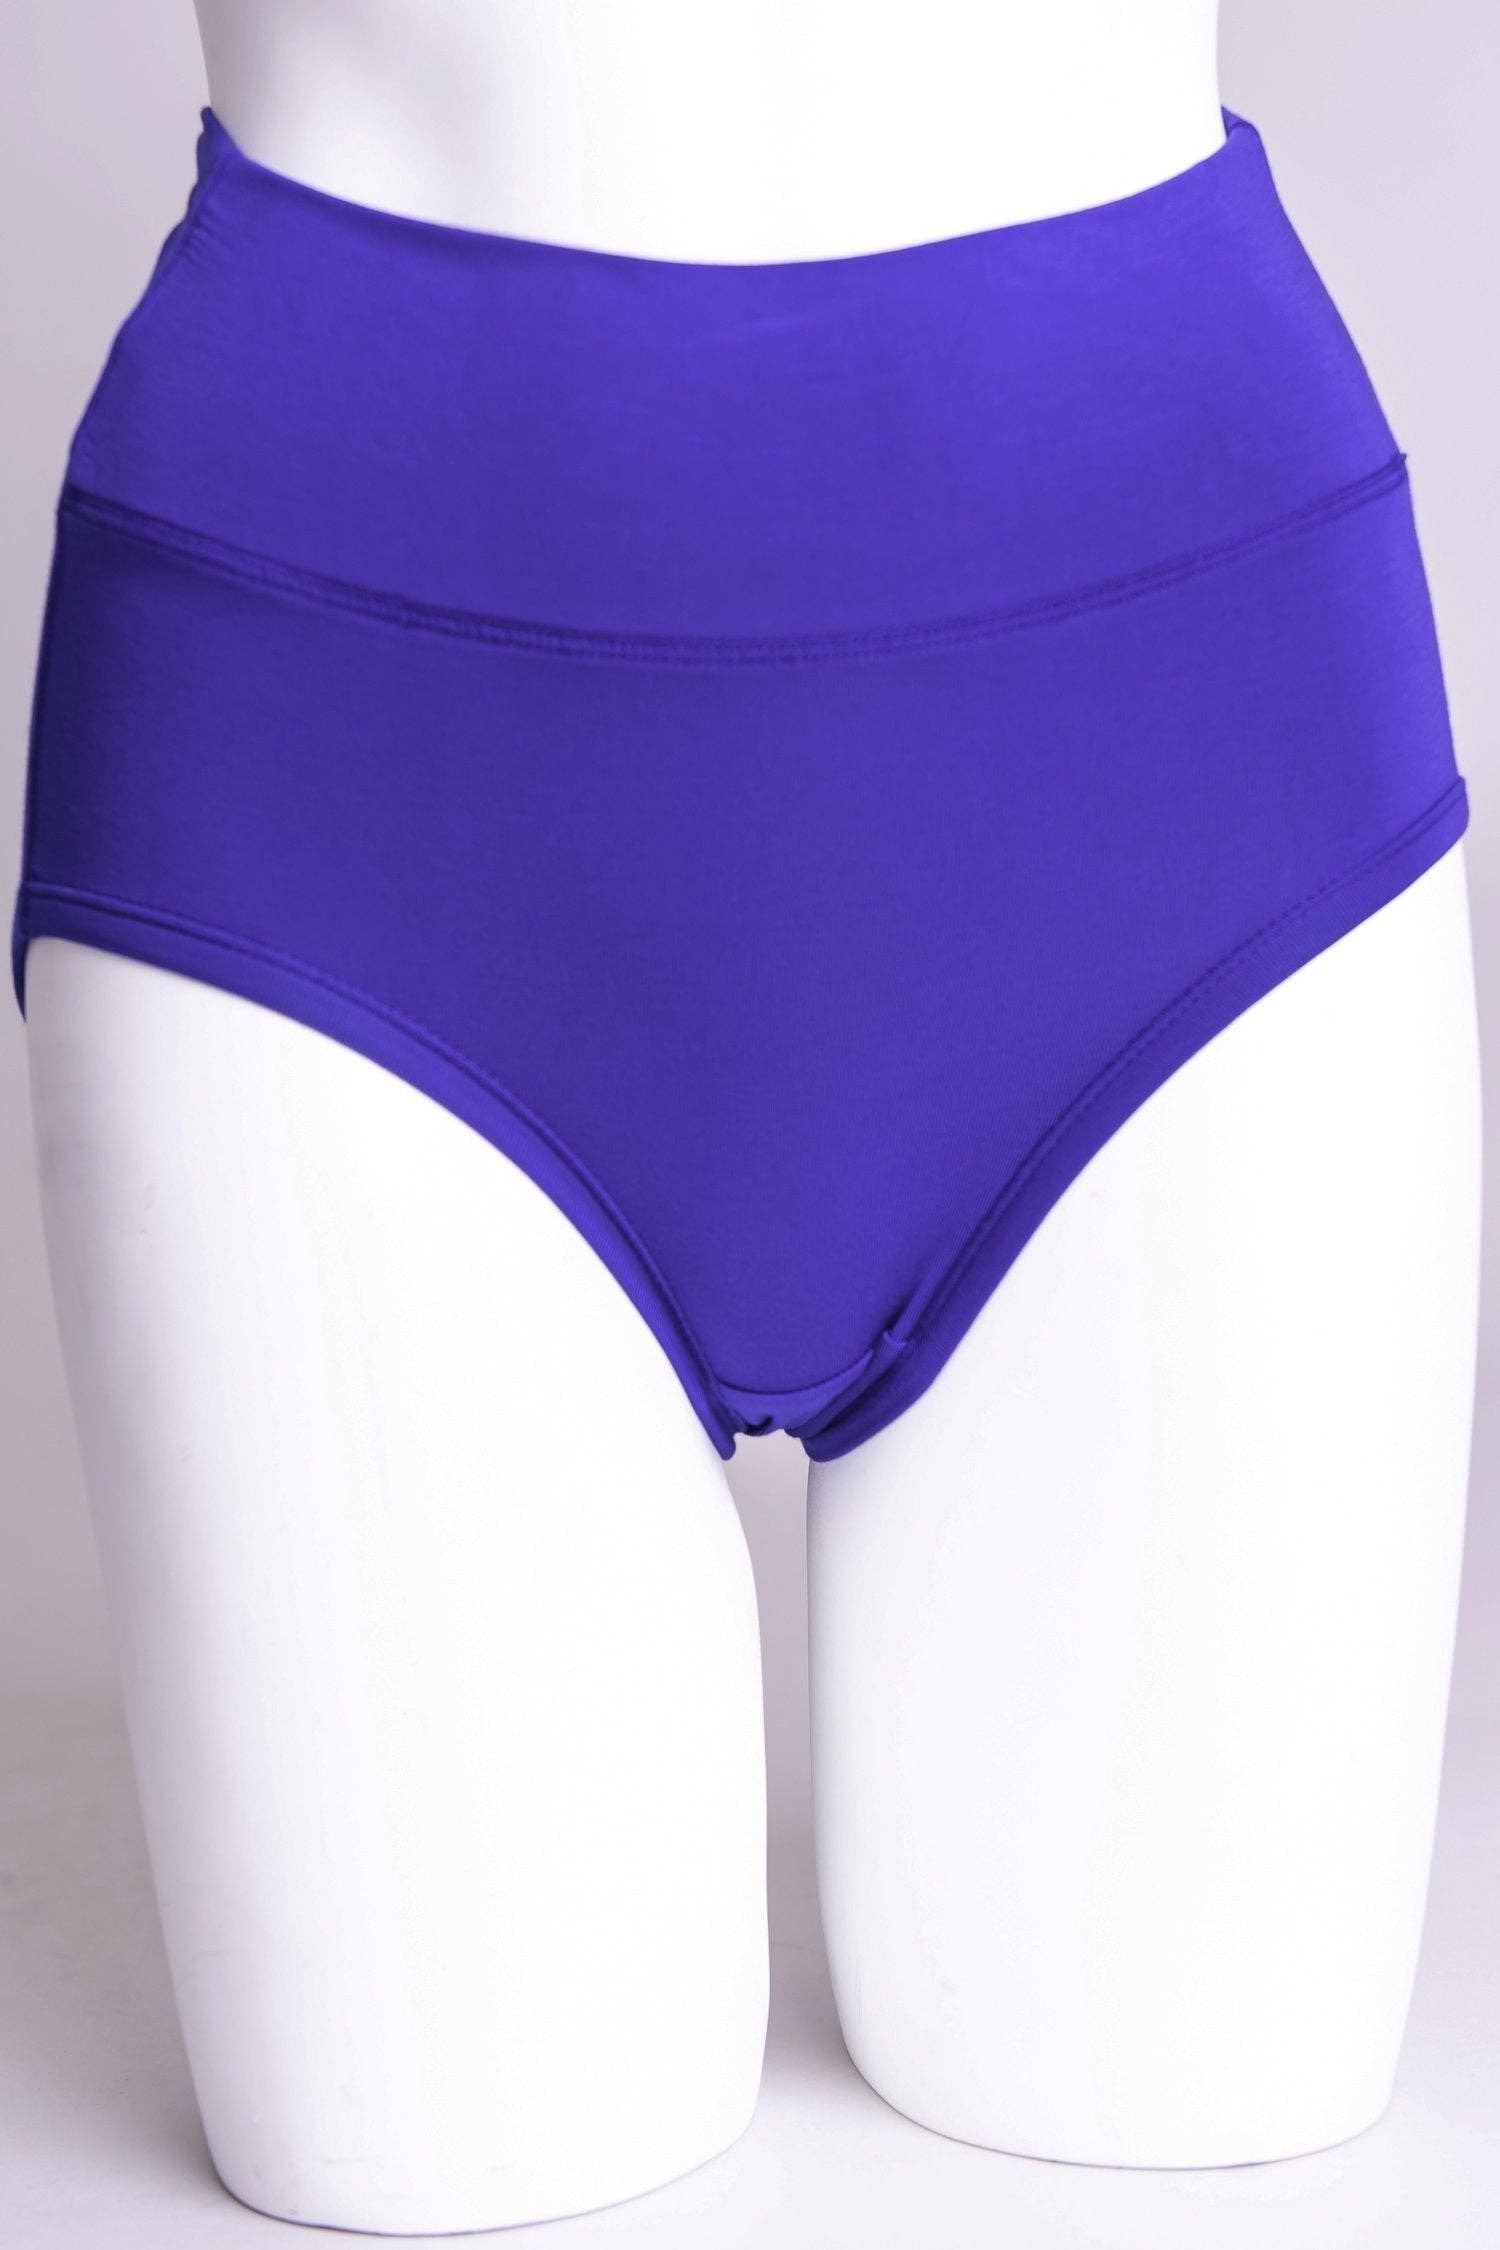 Blue Sky - La Gaunche Violet Stripes  Women's Bamboo Underwear – All  Things Being Eco